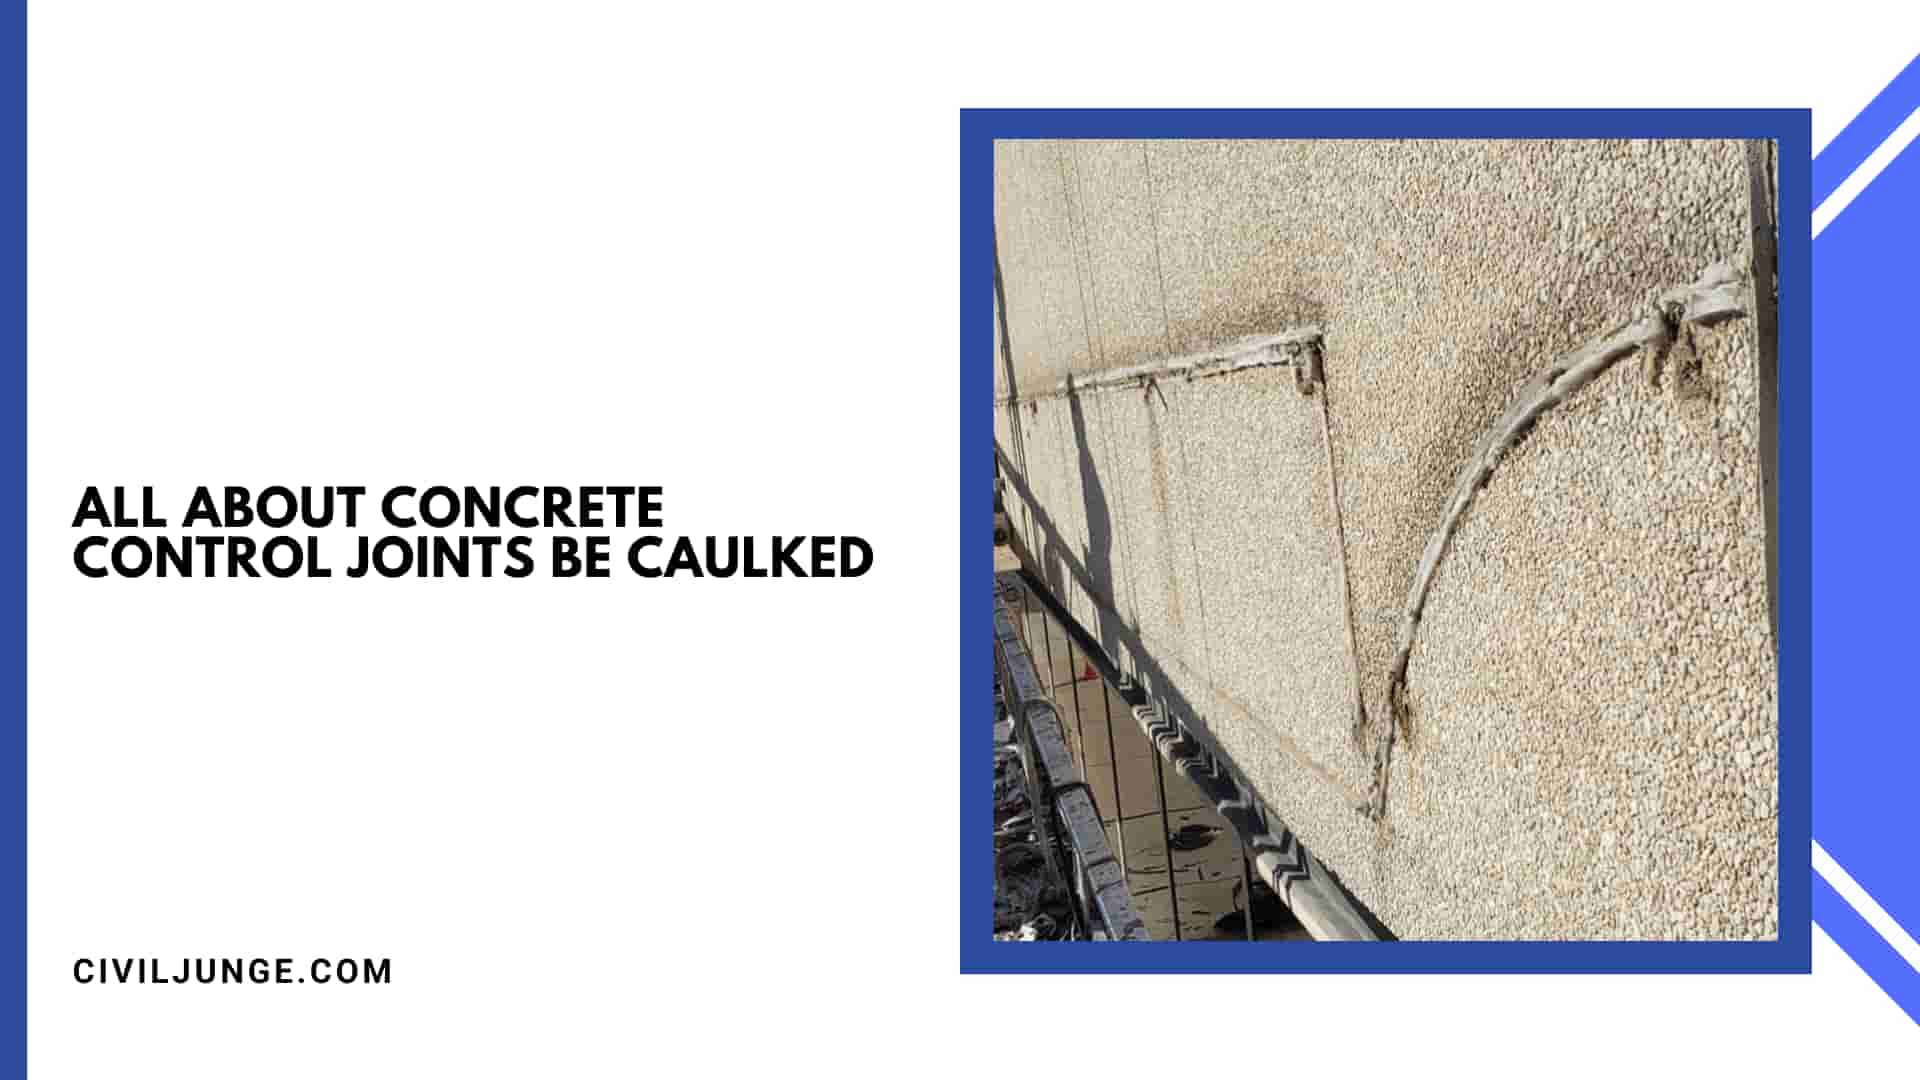 All About Concrete Control Joints Be Caulked